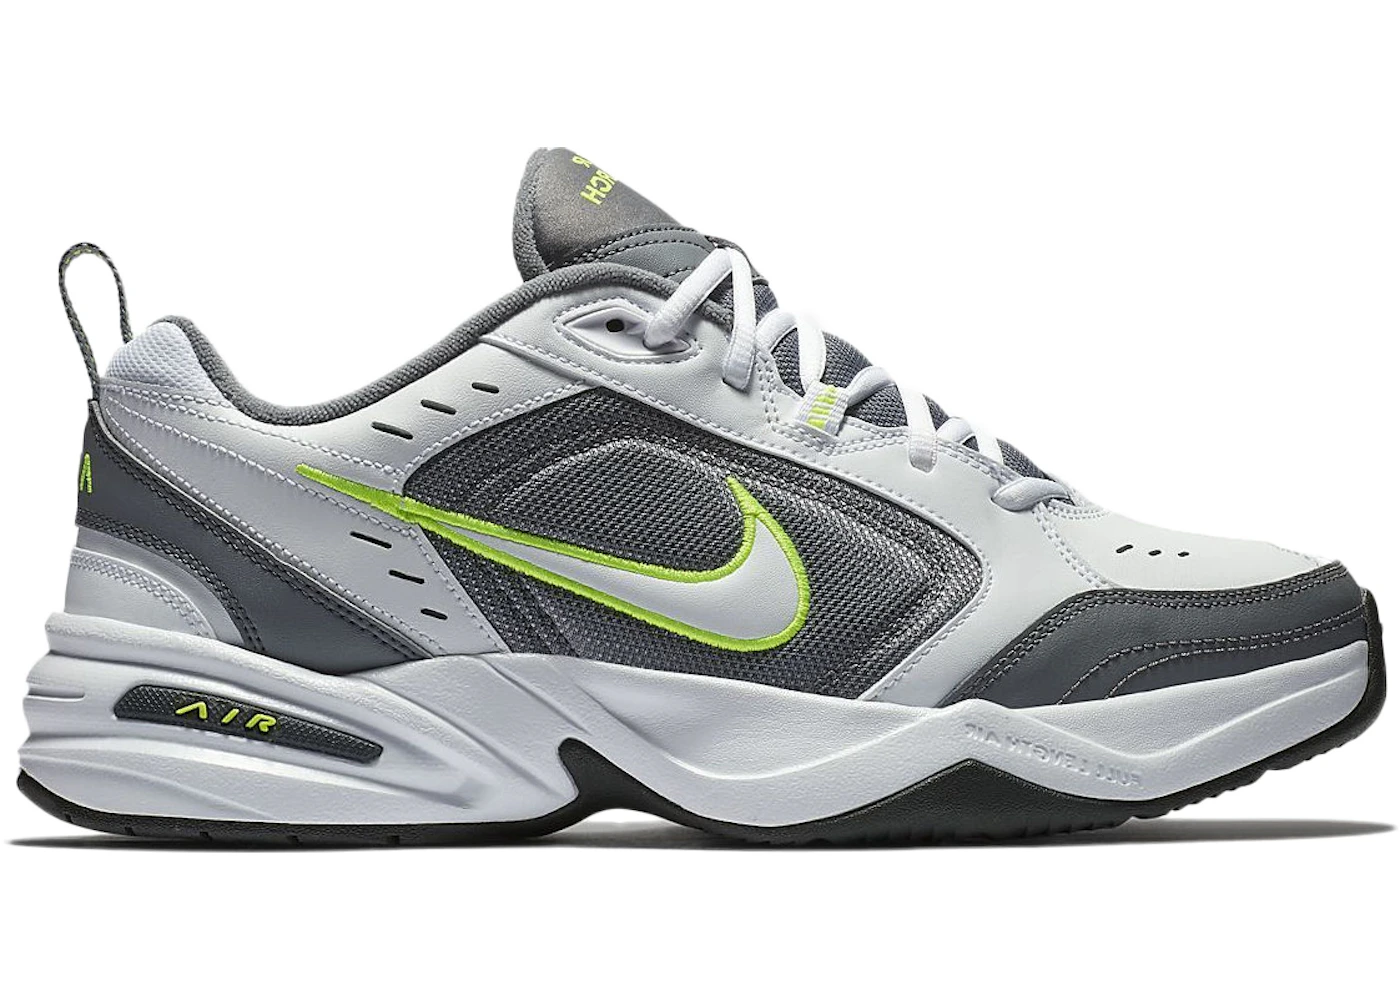 Nike Air Monarch IV White/Cool Grey/Anthracite/White - 415445-100